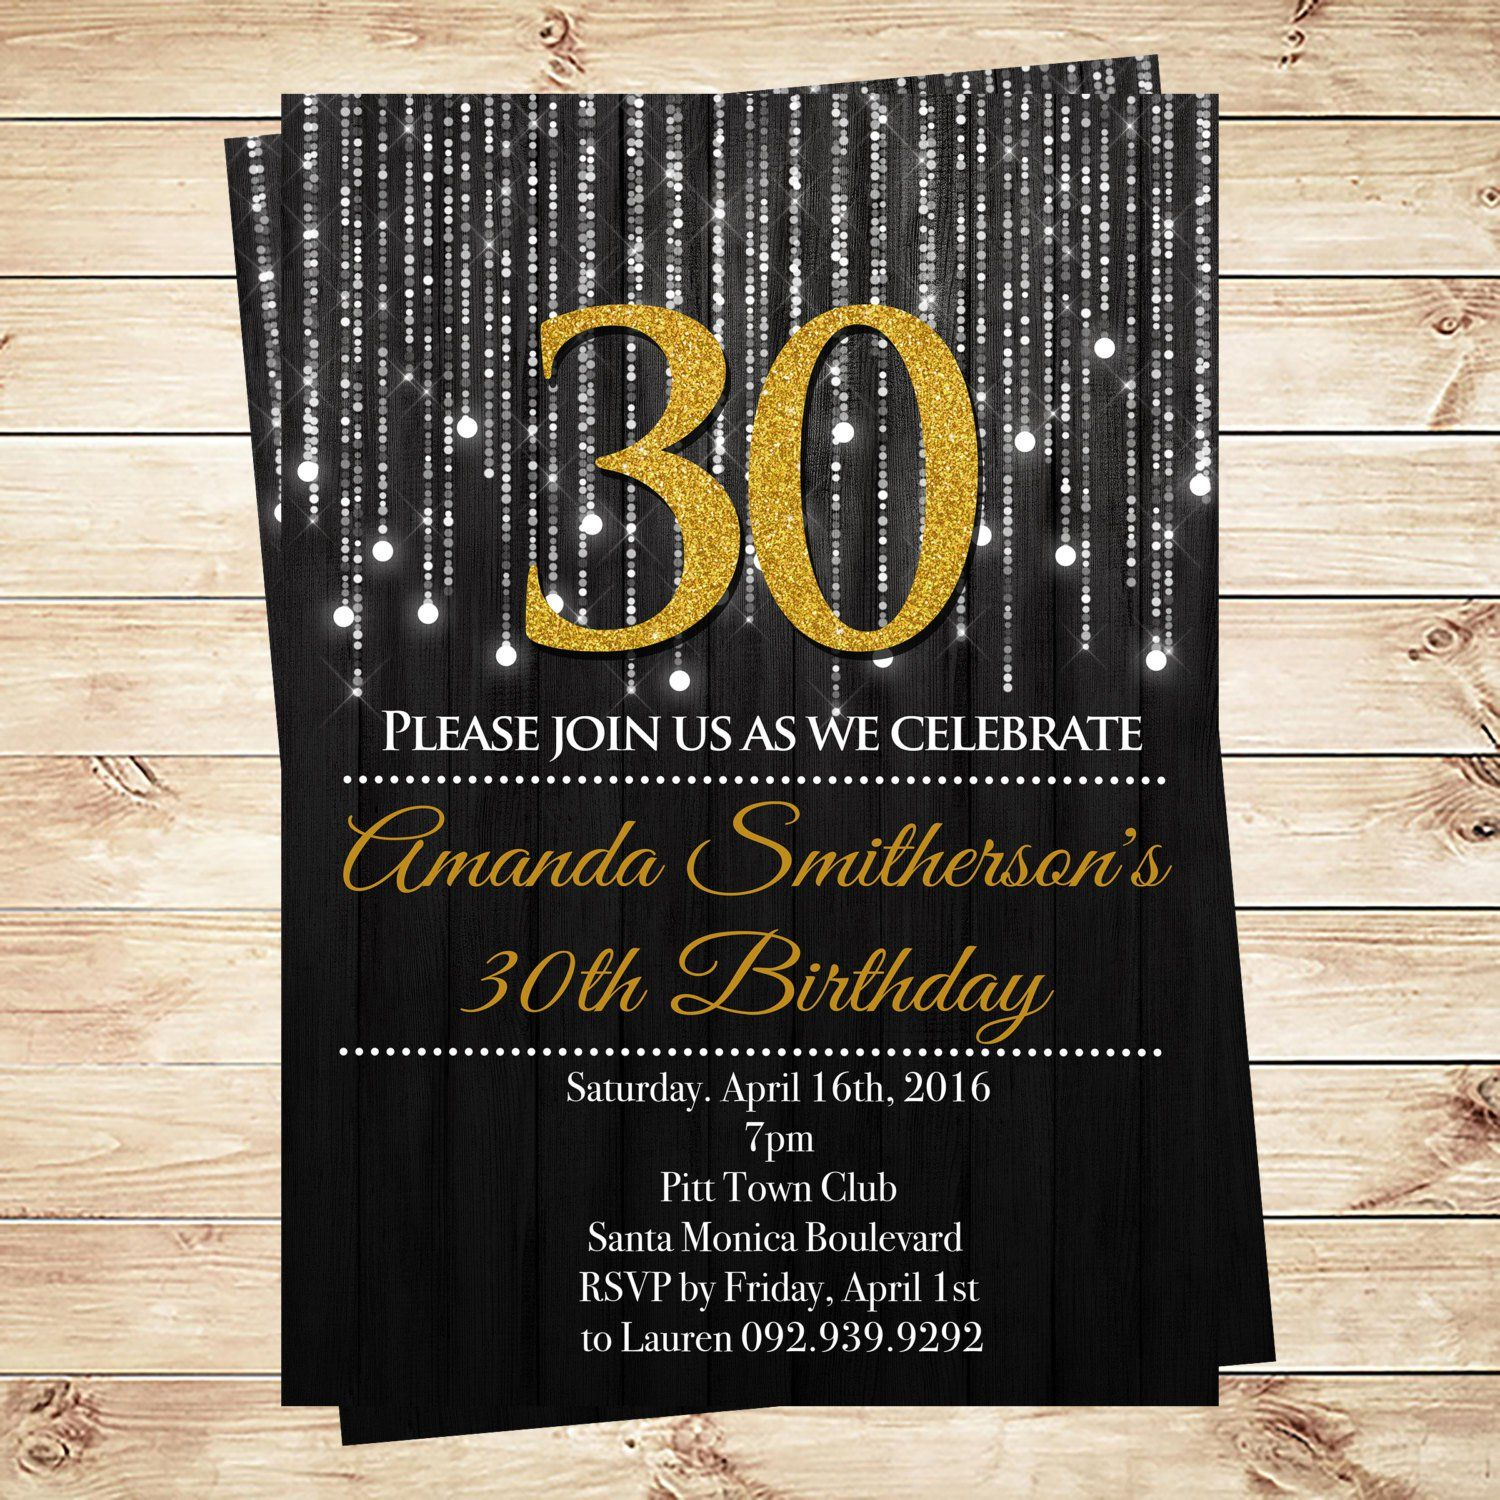 30th-birthday-invitation-templates-for-her-business-template-ideas